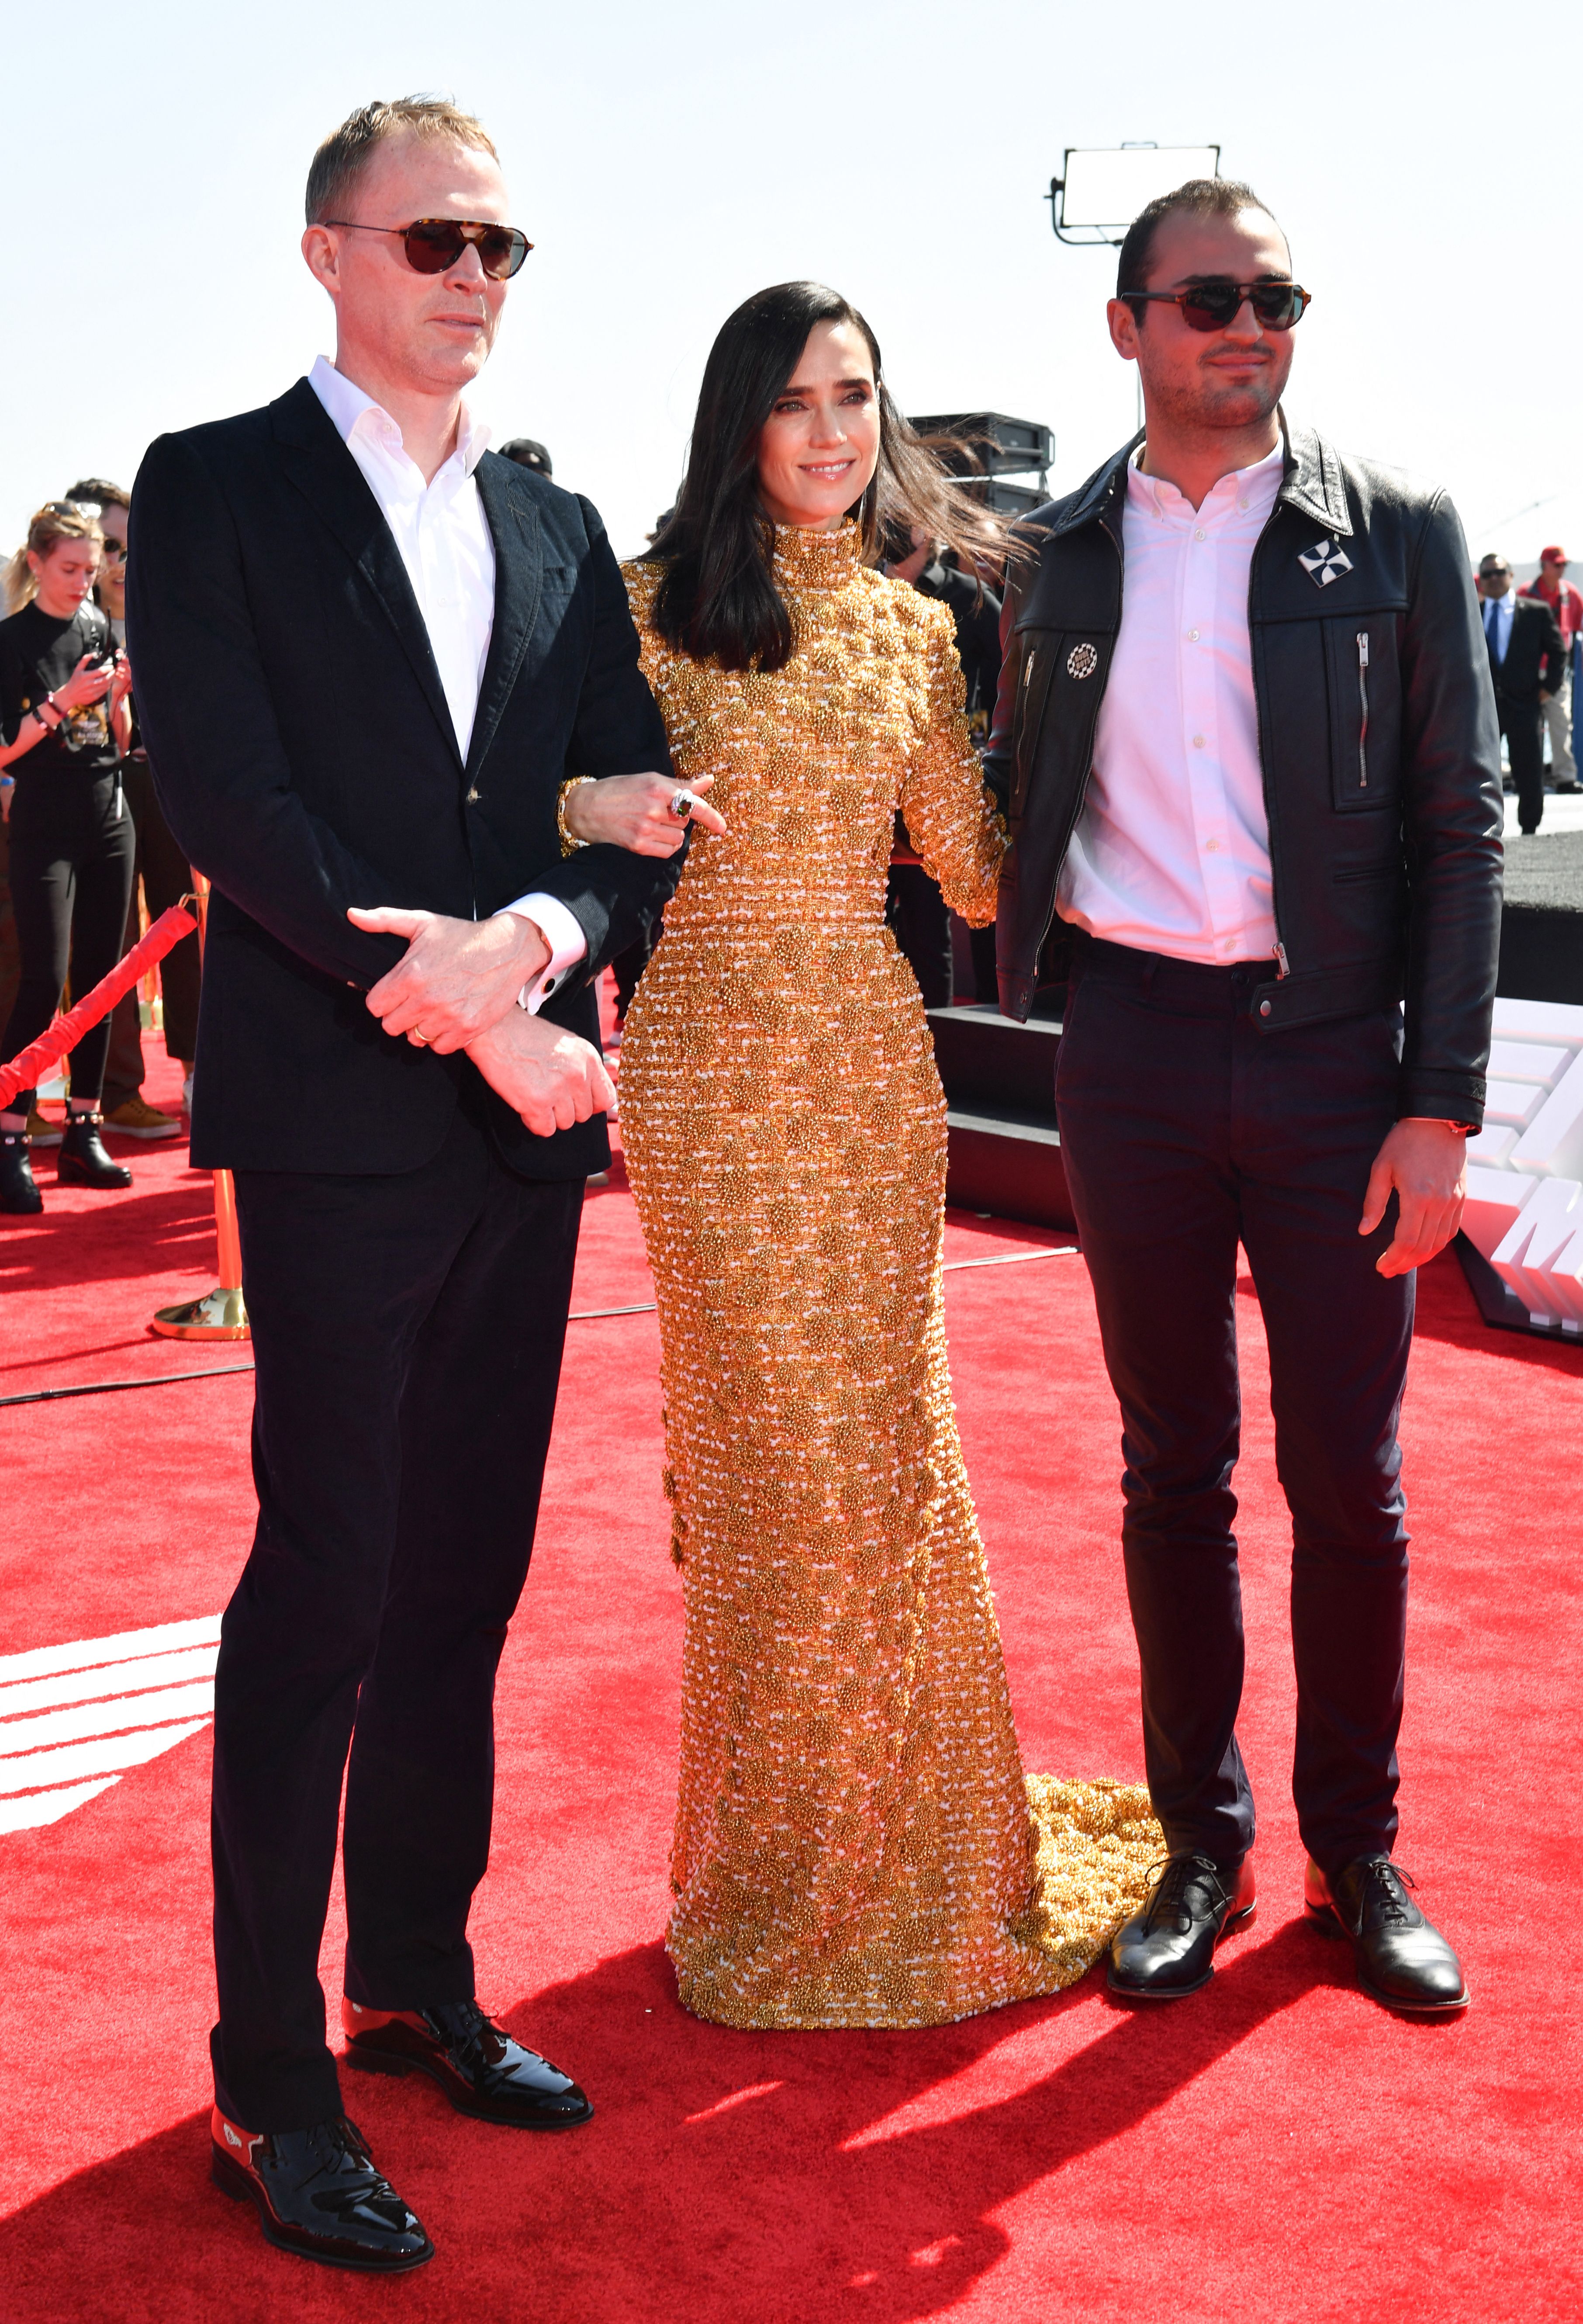 English actor Paul Bettany with his wife Jennifer Connelly and her son Kai Dugan at the world premiere of "Top Gun: Maverick!" aboard the USS Midway on May 4, 2022 in San Diego, California | Source: Getty Images